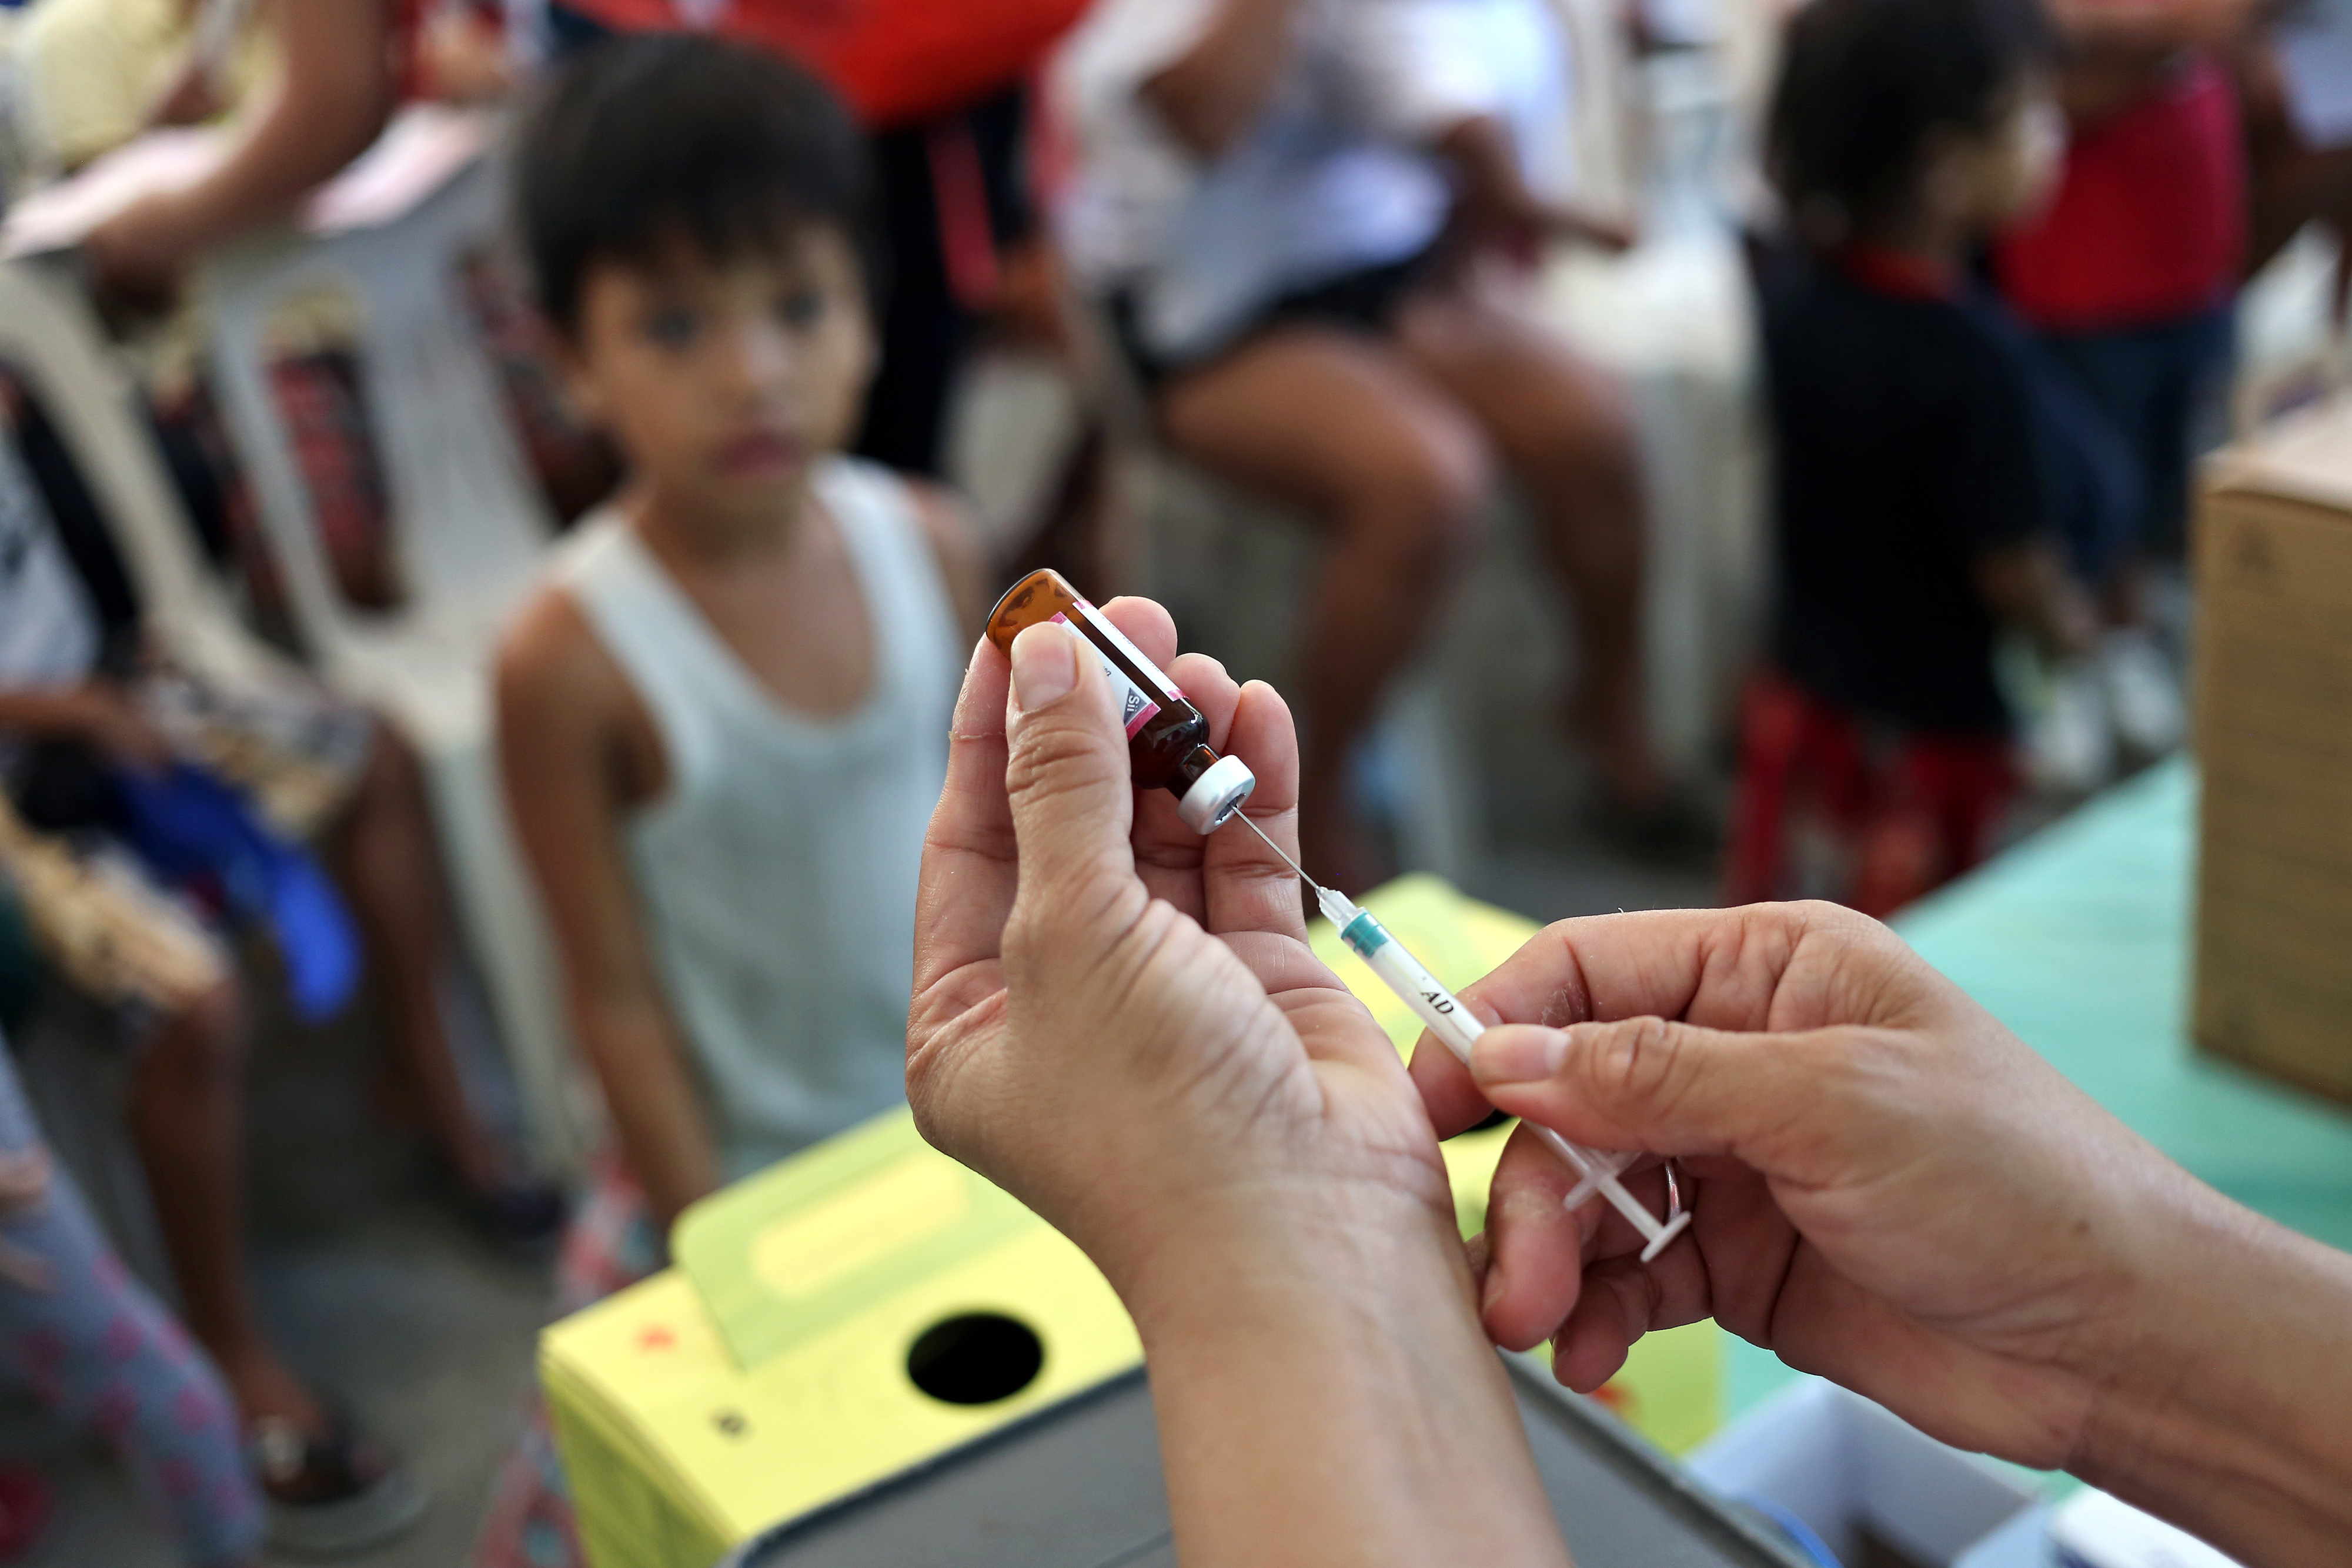 Red Cross staff work on a measles vaccination campaign in Manila, Philippines on Feb. 16, 2019 (Alejandro Ernesto—Picture Alliance/Getty Images)